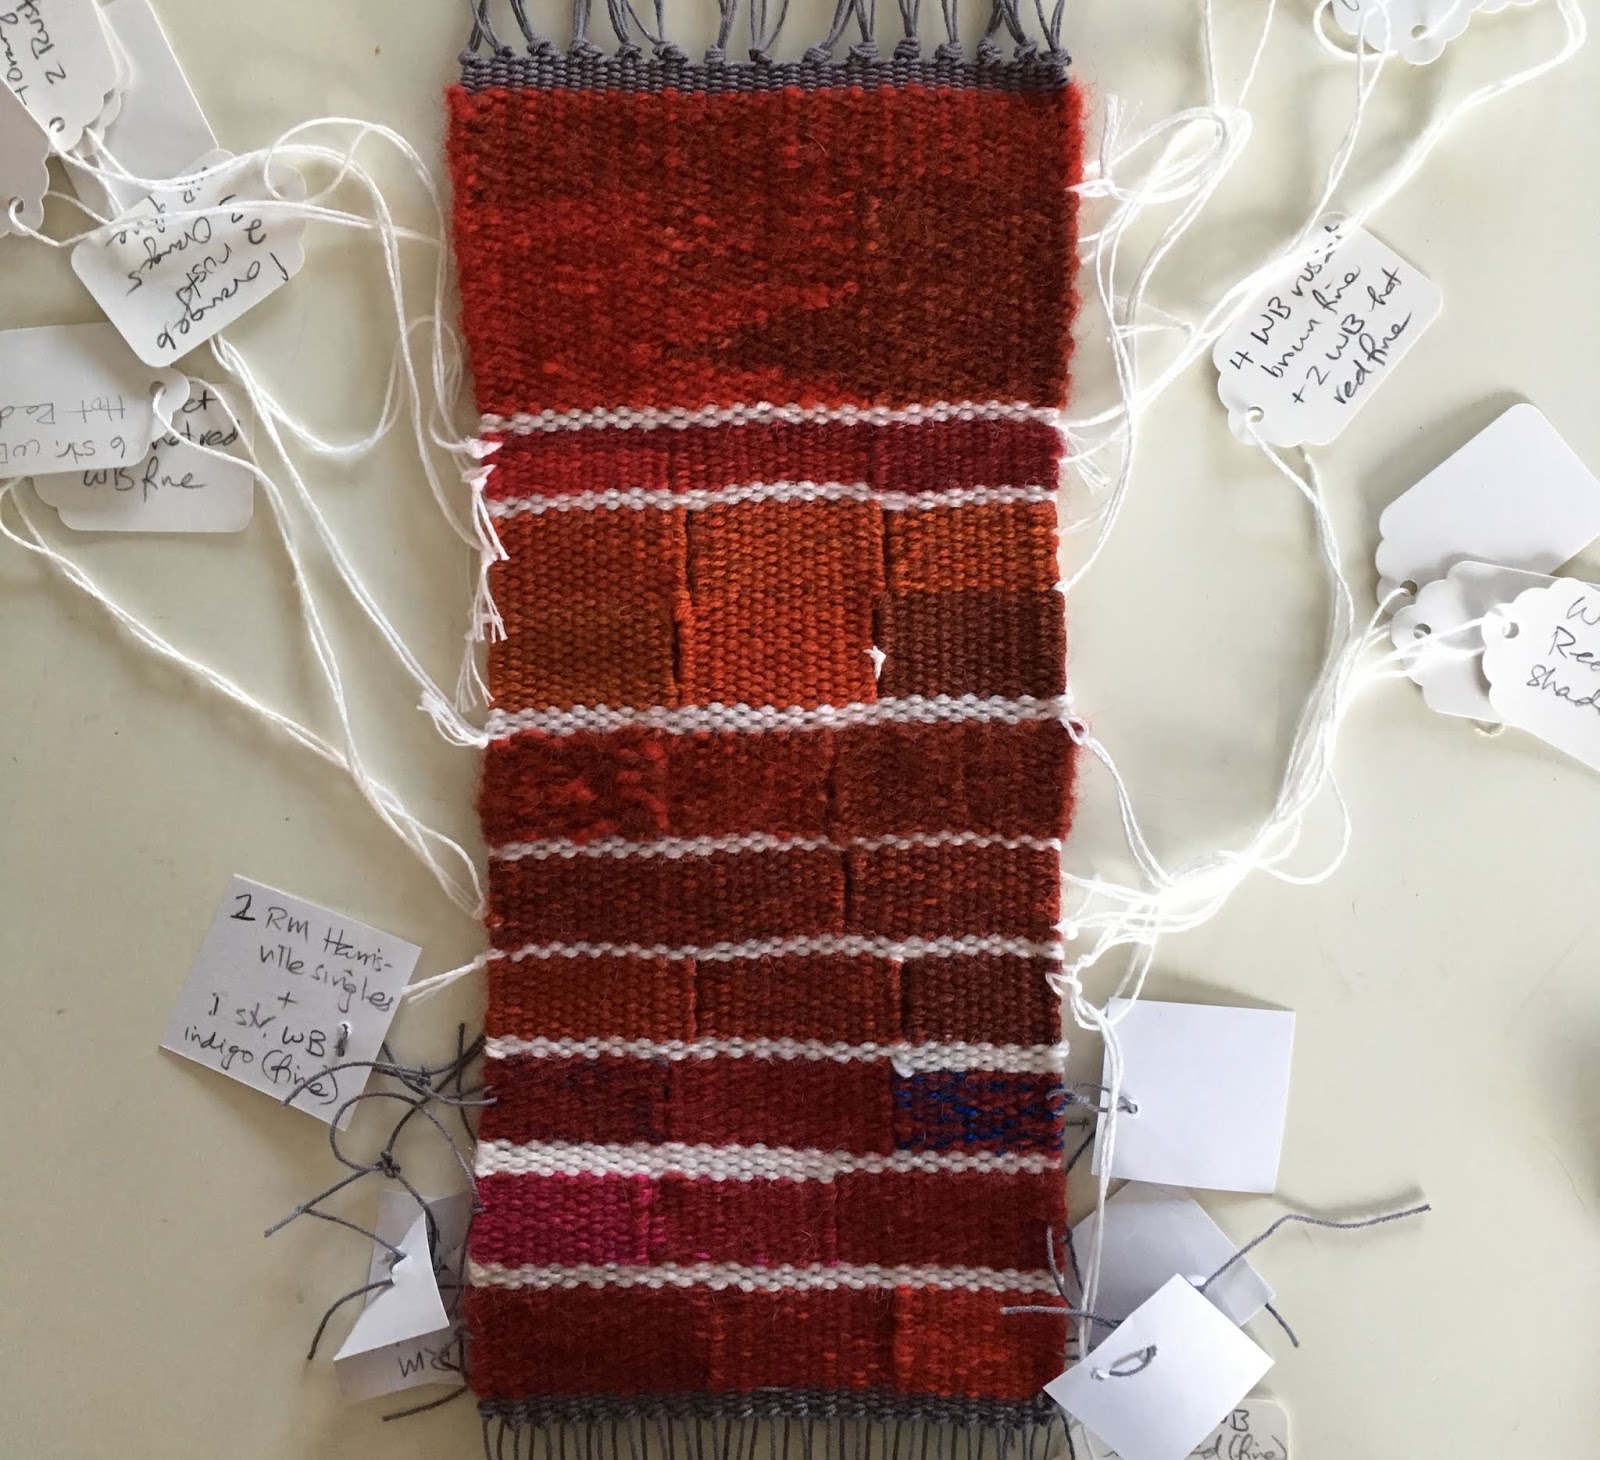 Molly Elkind : Talking Textiles: January 2019